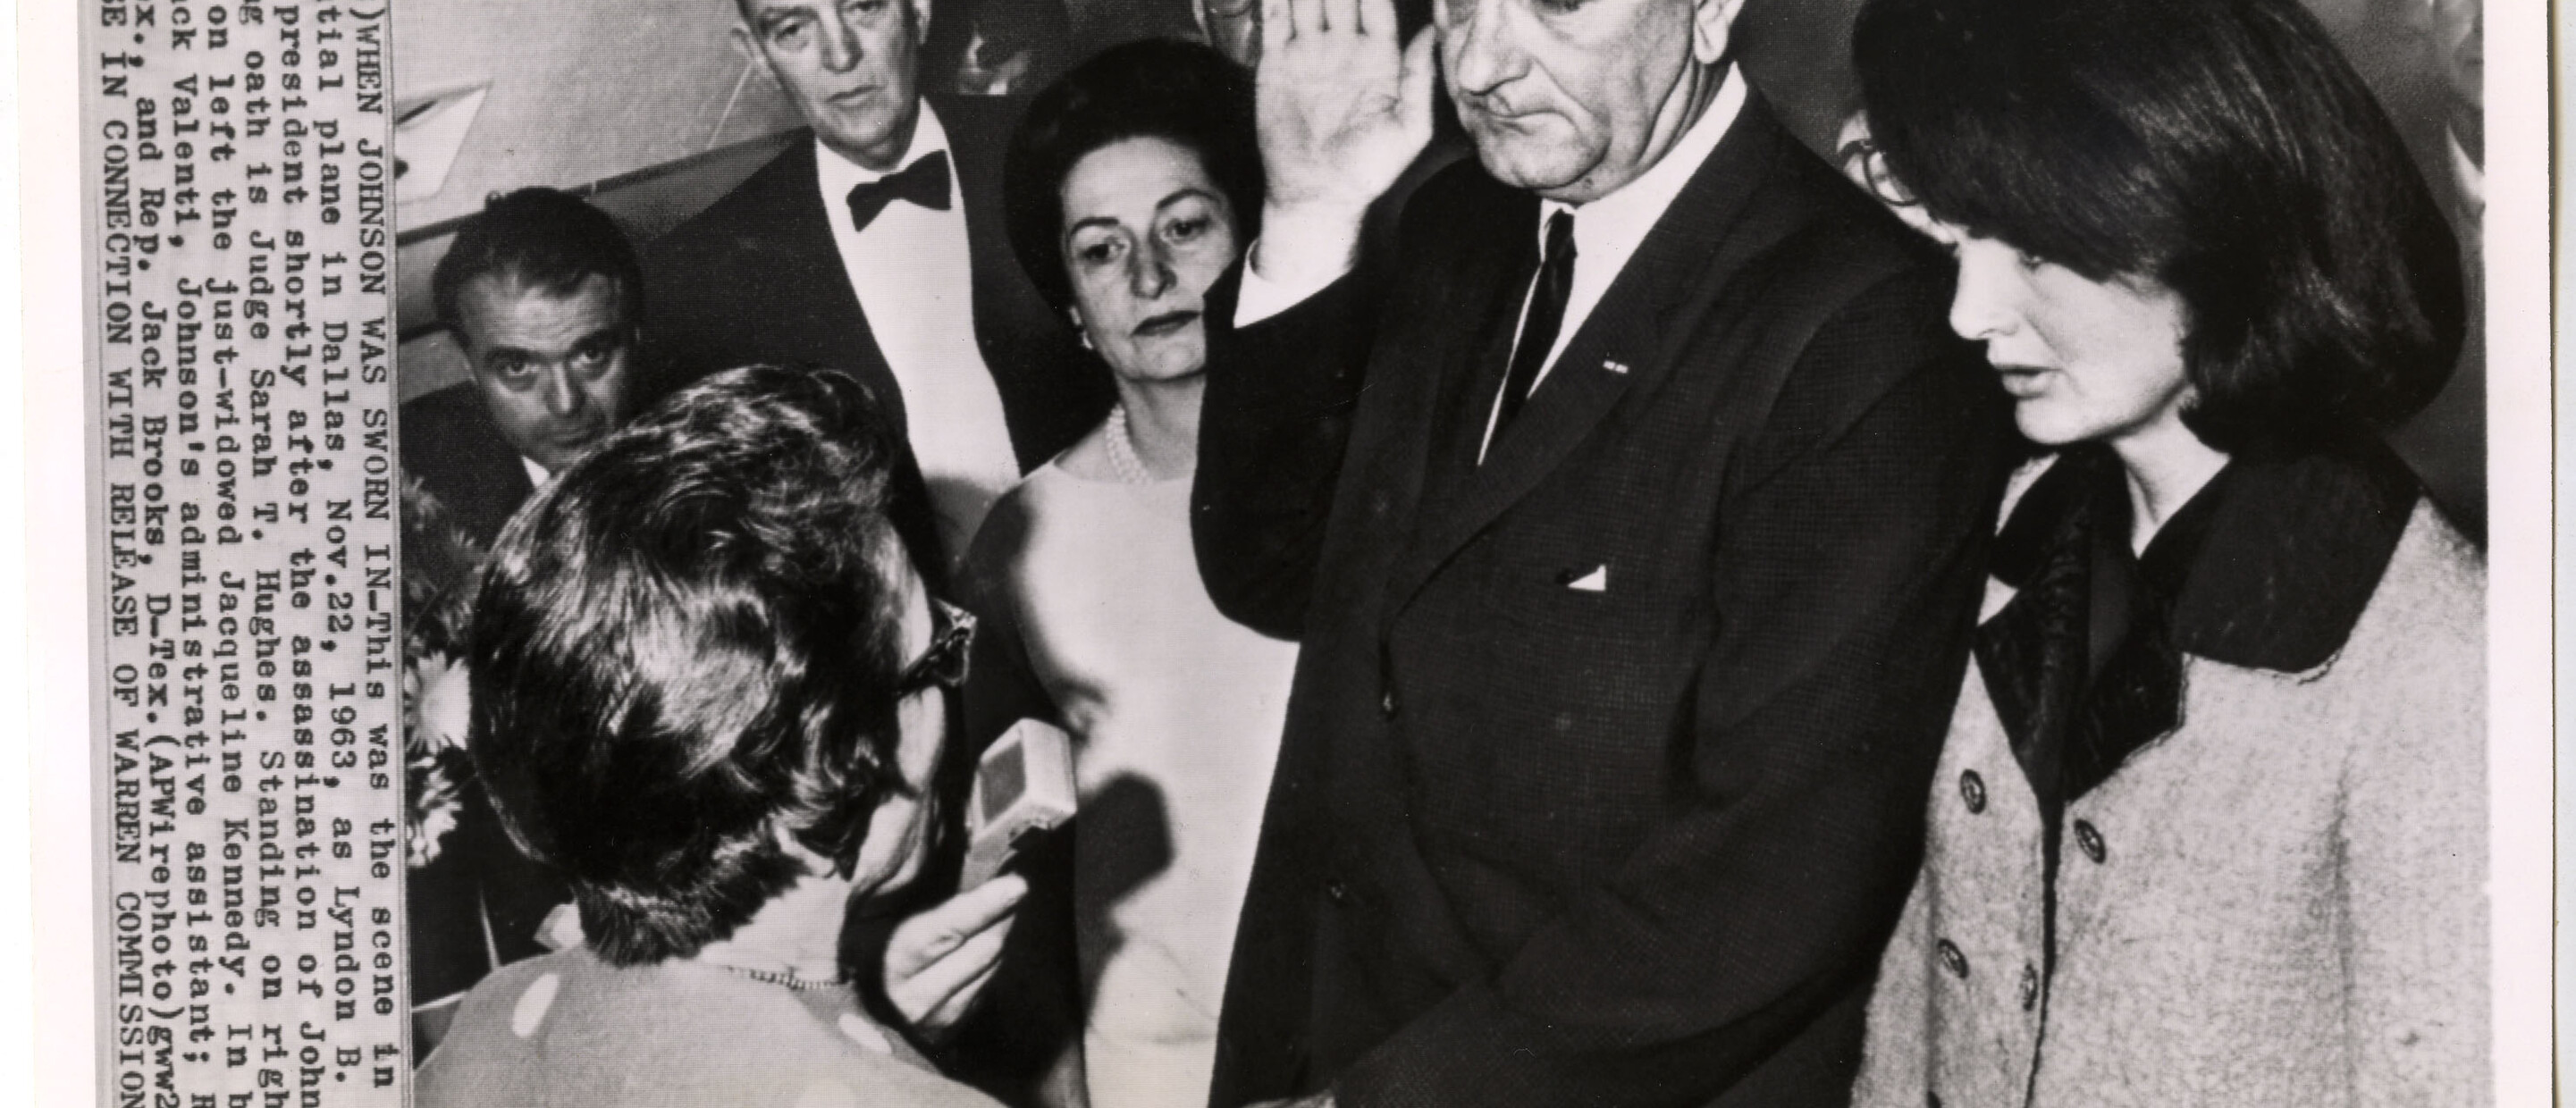 B&W photograph of President Lyndon B. Johnson being sworn in with Jackie Kennedy